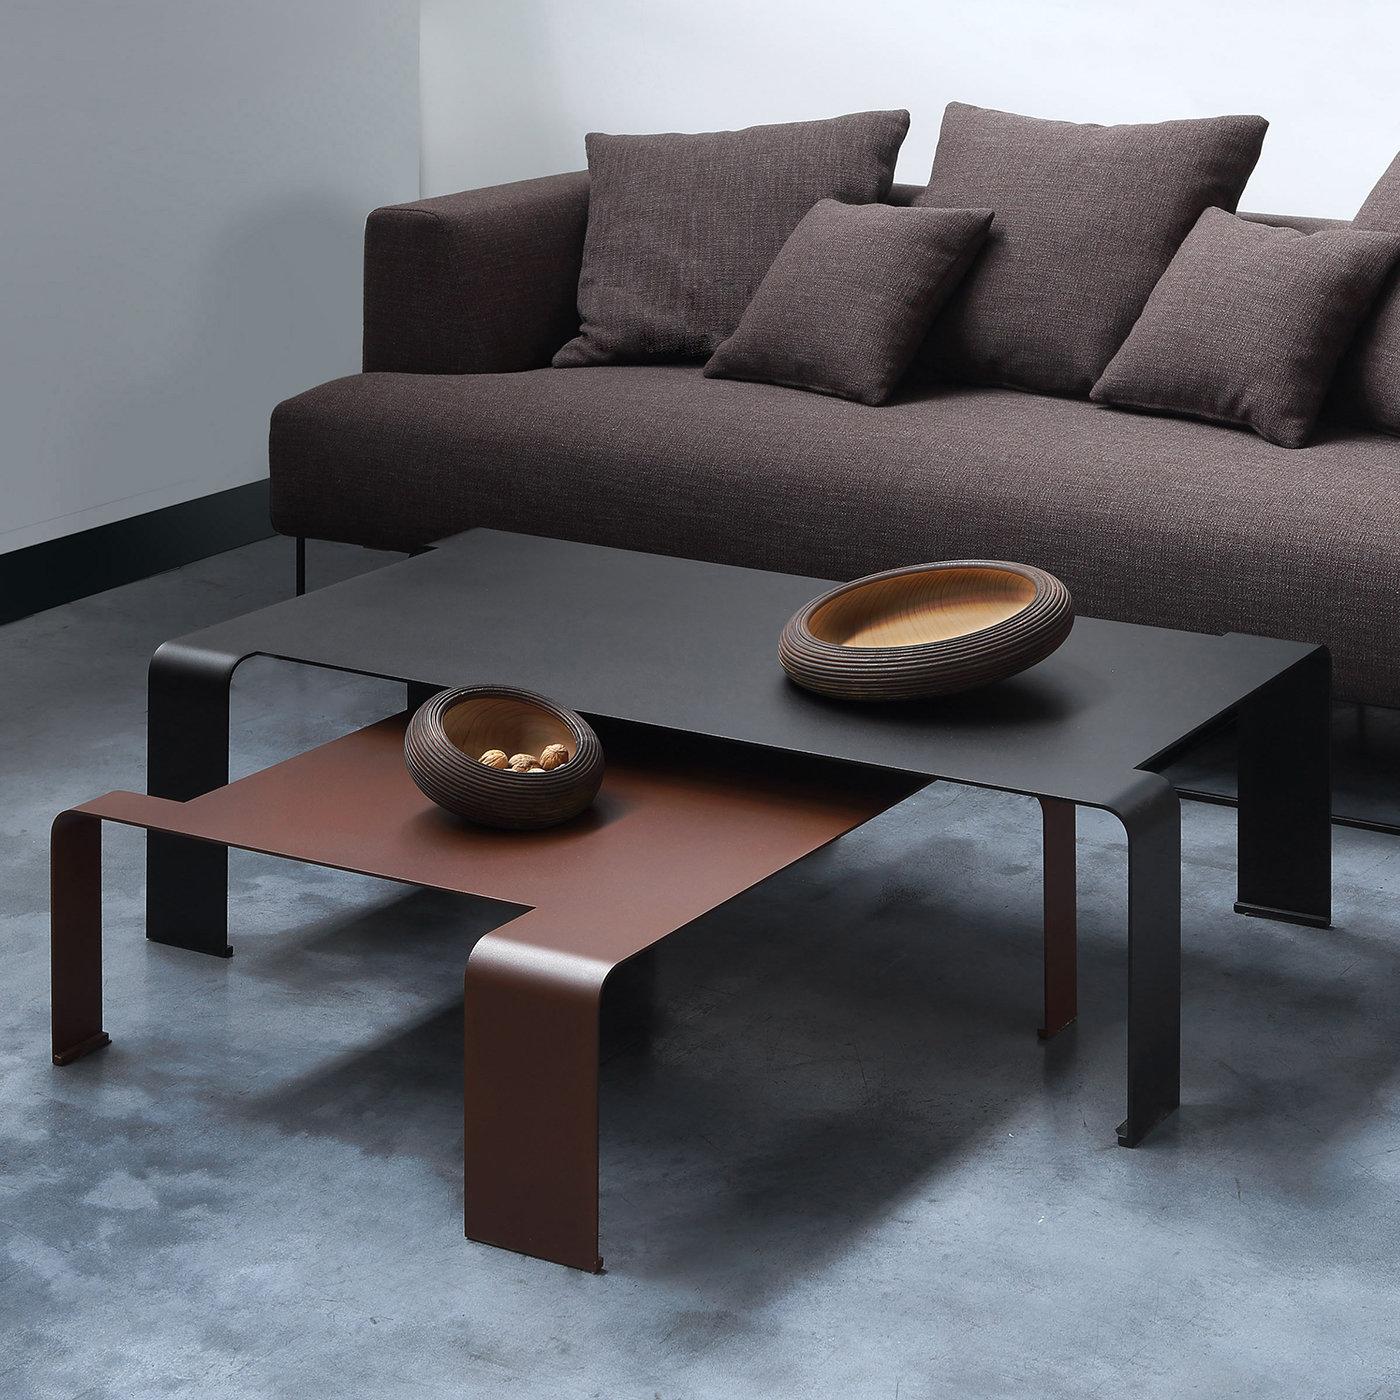 Elegant in its simplicity, this coffee table will create a striking and distinctive focal point in a minimalist or contemporary interior. Boasting a total black look obtained with a black sanded-copper finish, it is entirely handcrafted from a bent